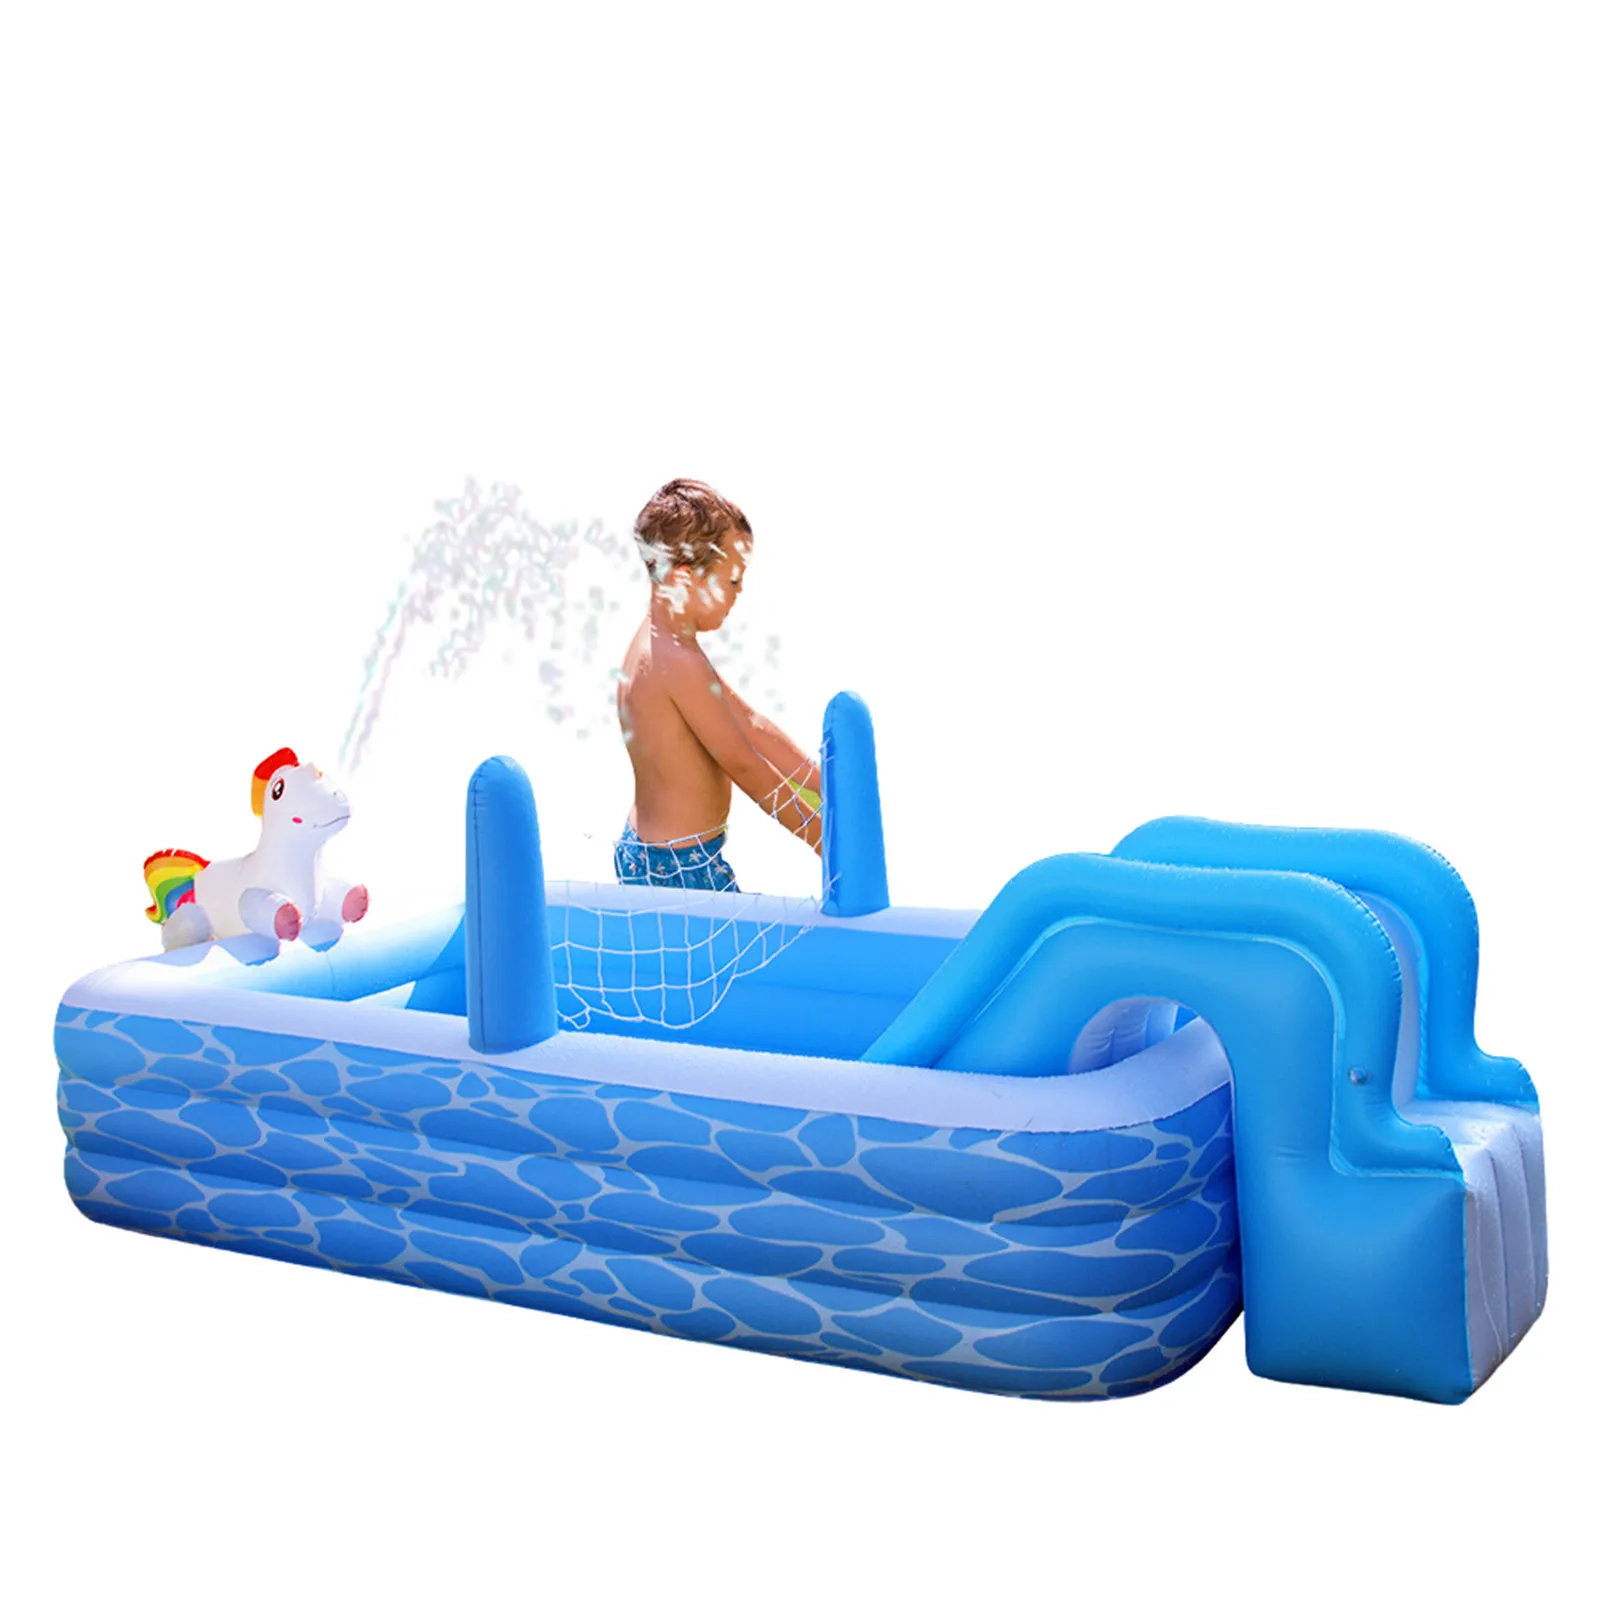 Inflatable Swimming Pool Multi-purpose Above Ground Swimming Pool Sprinkler Slide Volleyball Net Above Ground Swimming Lounge